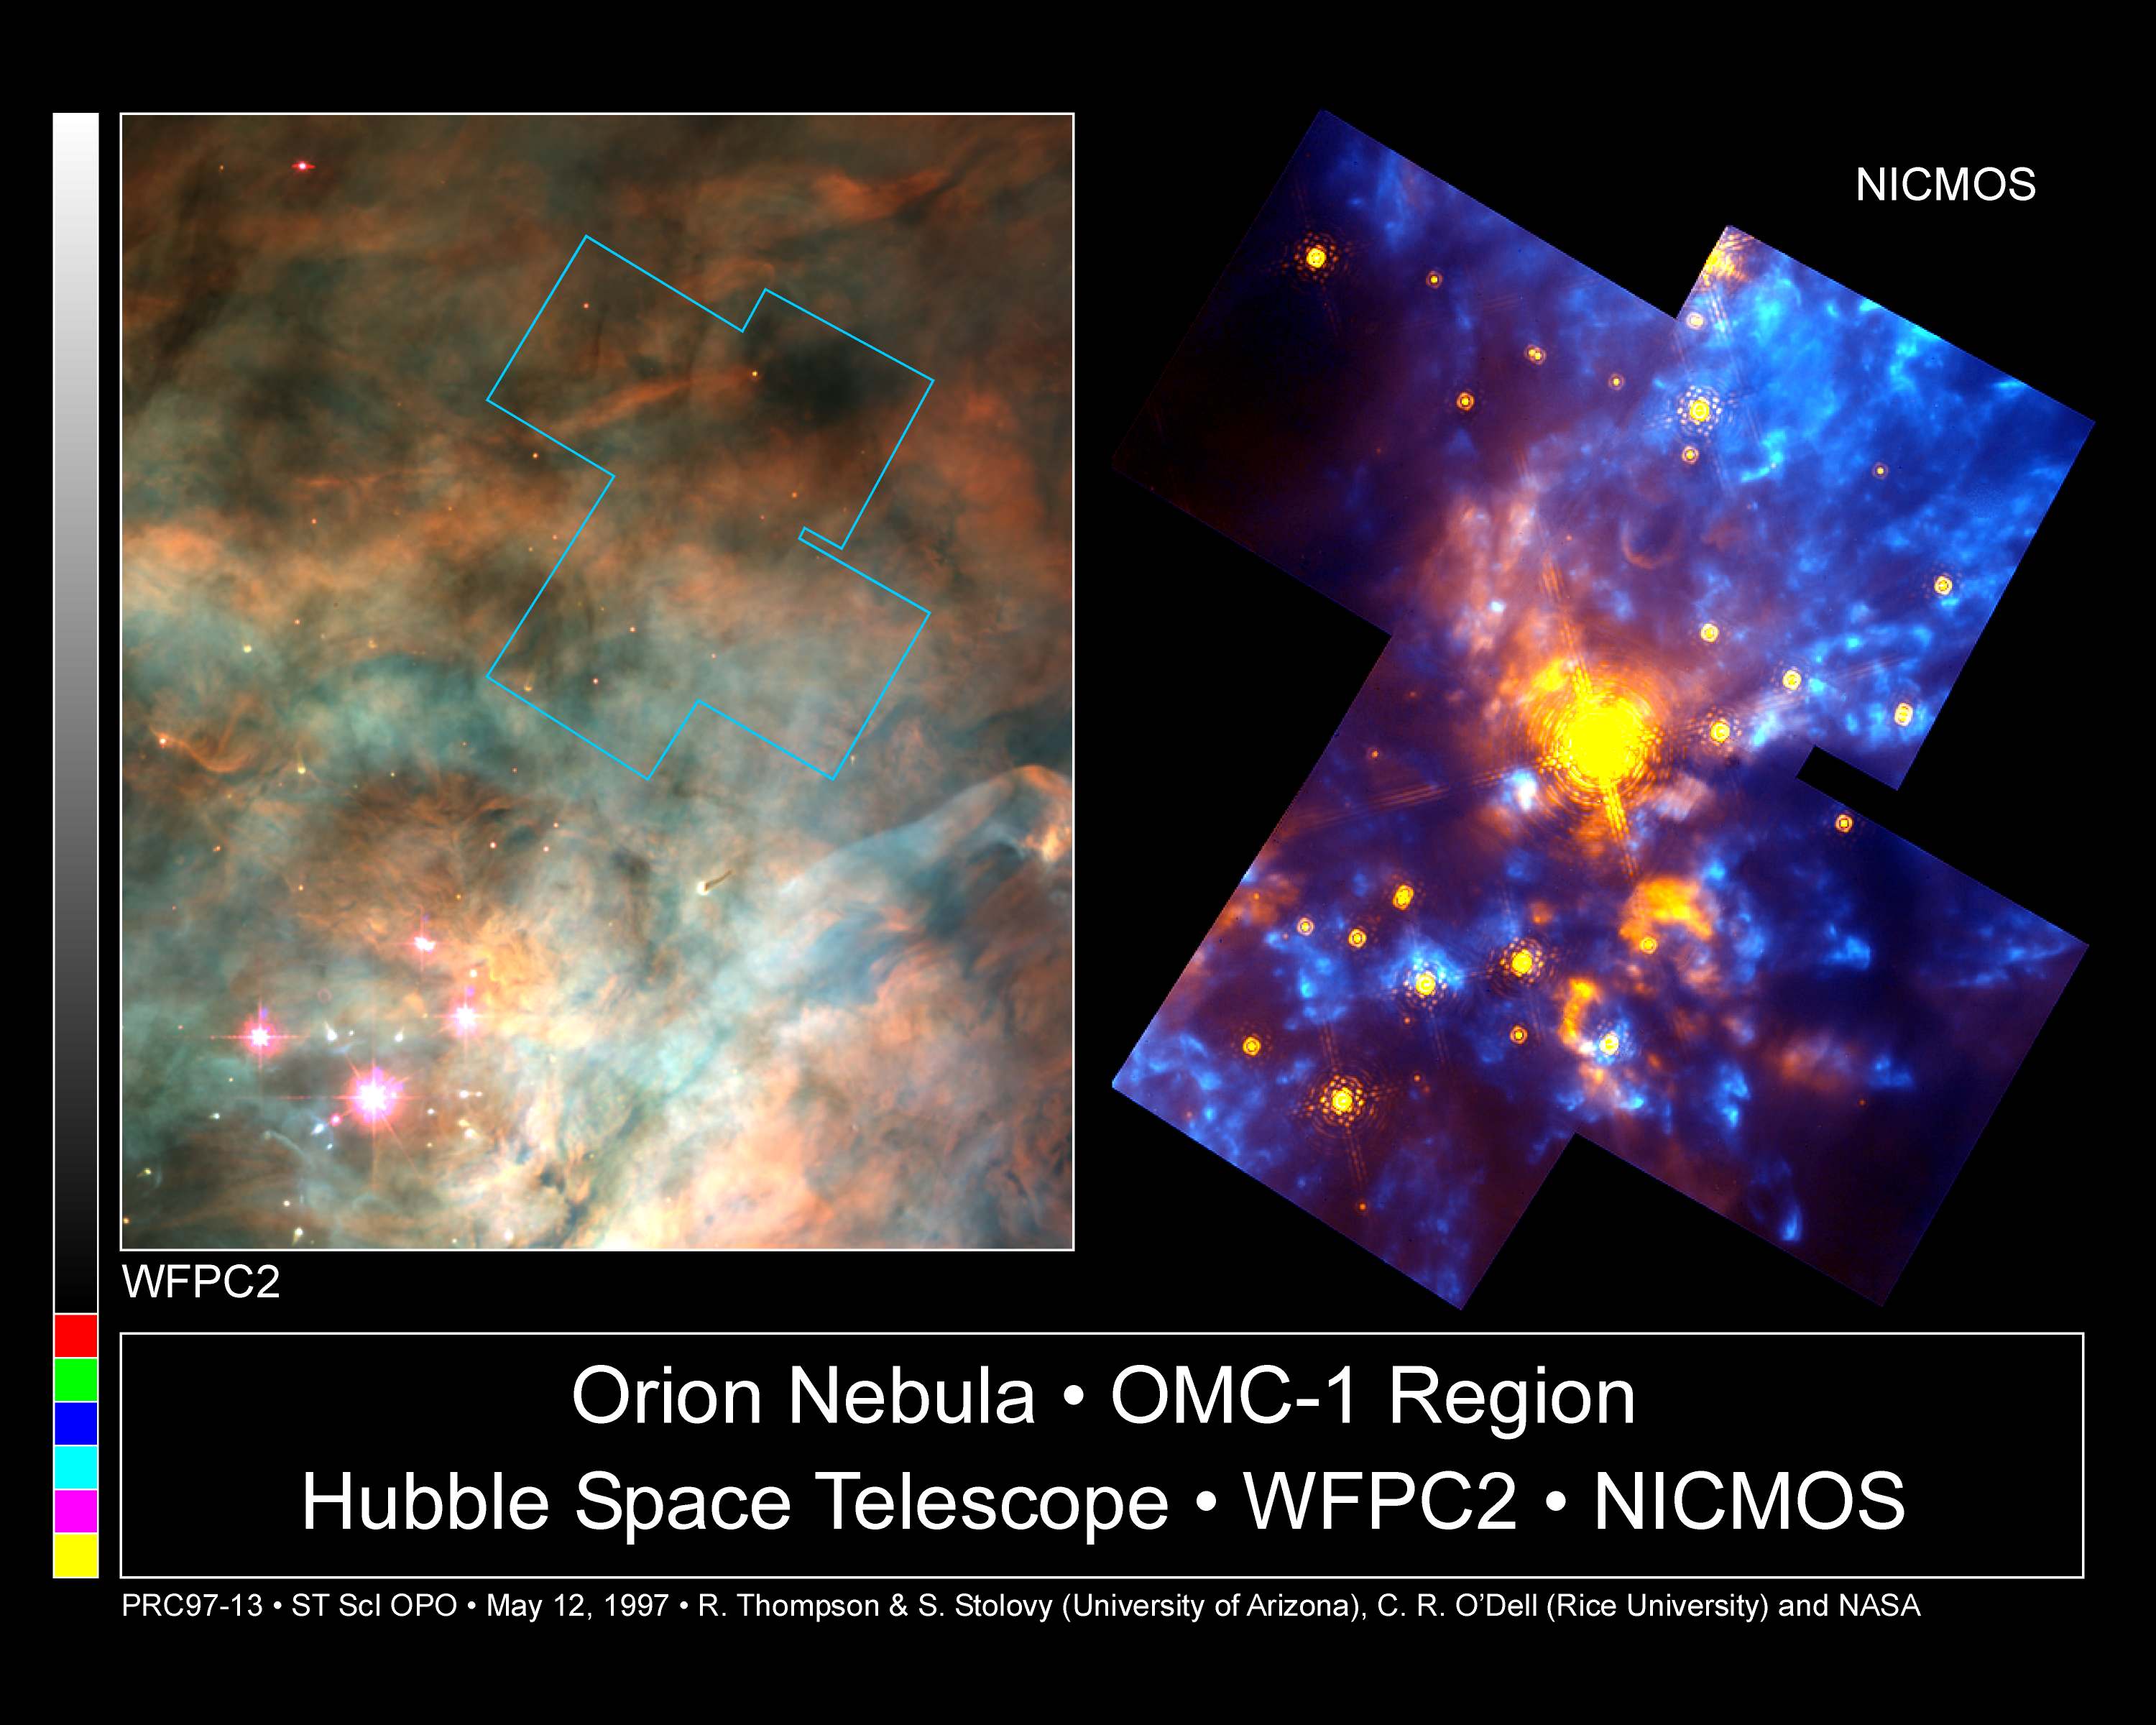 Two images: The left side holds a colorful cloud in hues of green, pink, white, yellow, and light blue. The right side holds a bright yellow spot surrounded by clouds of yellow, reddish-orange, purple, and blue.